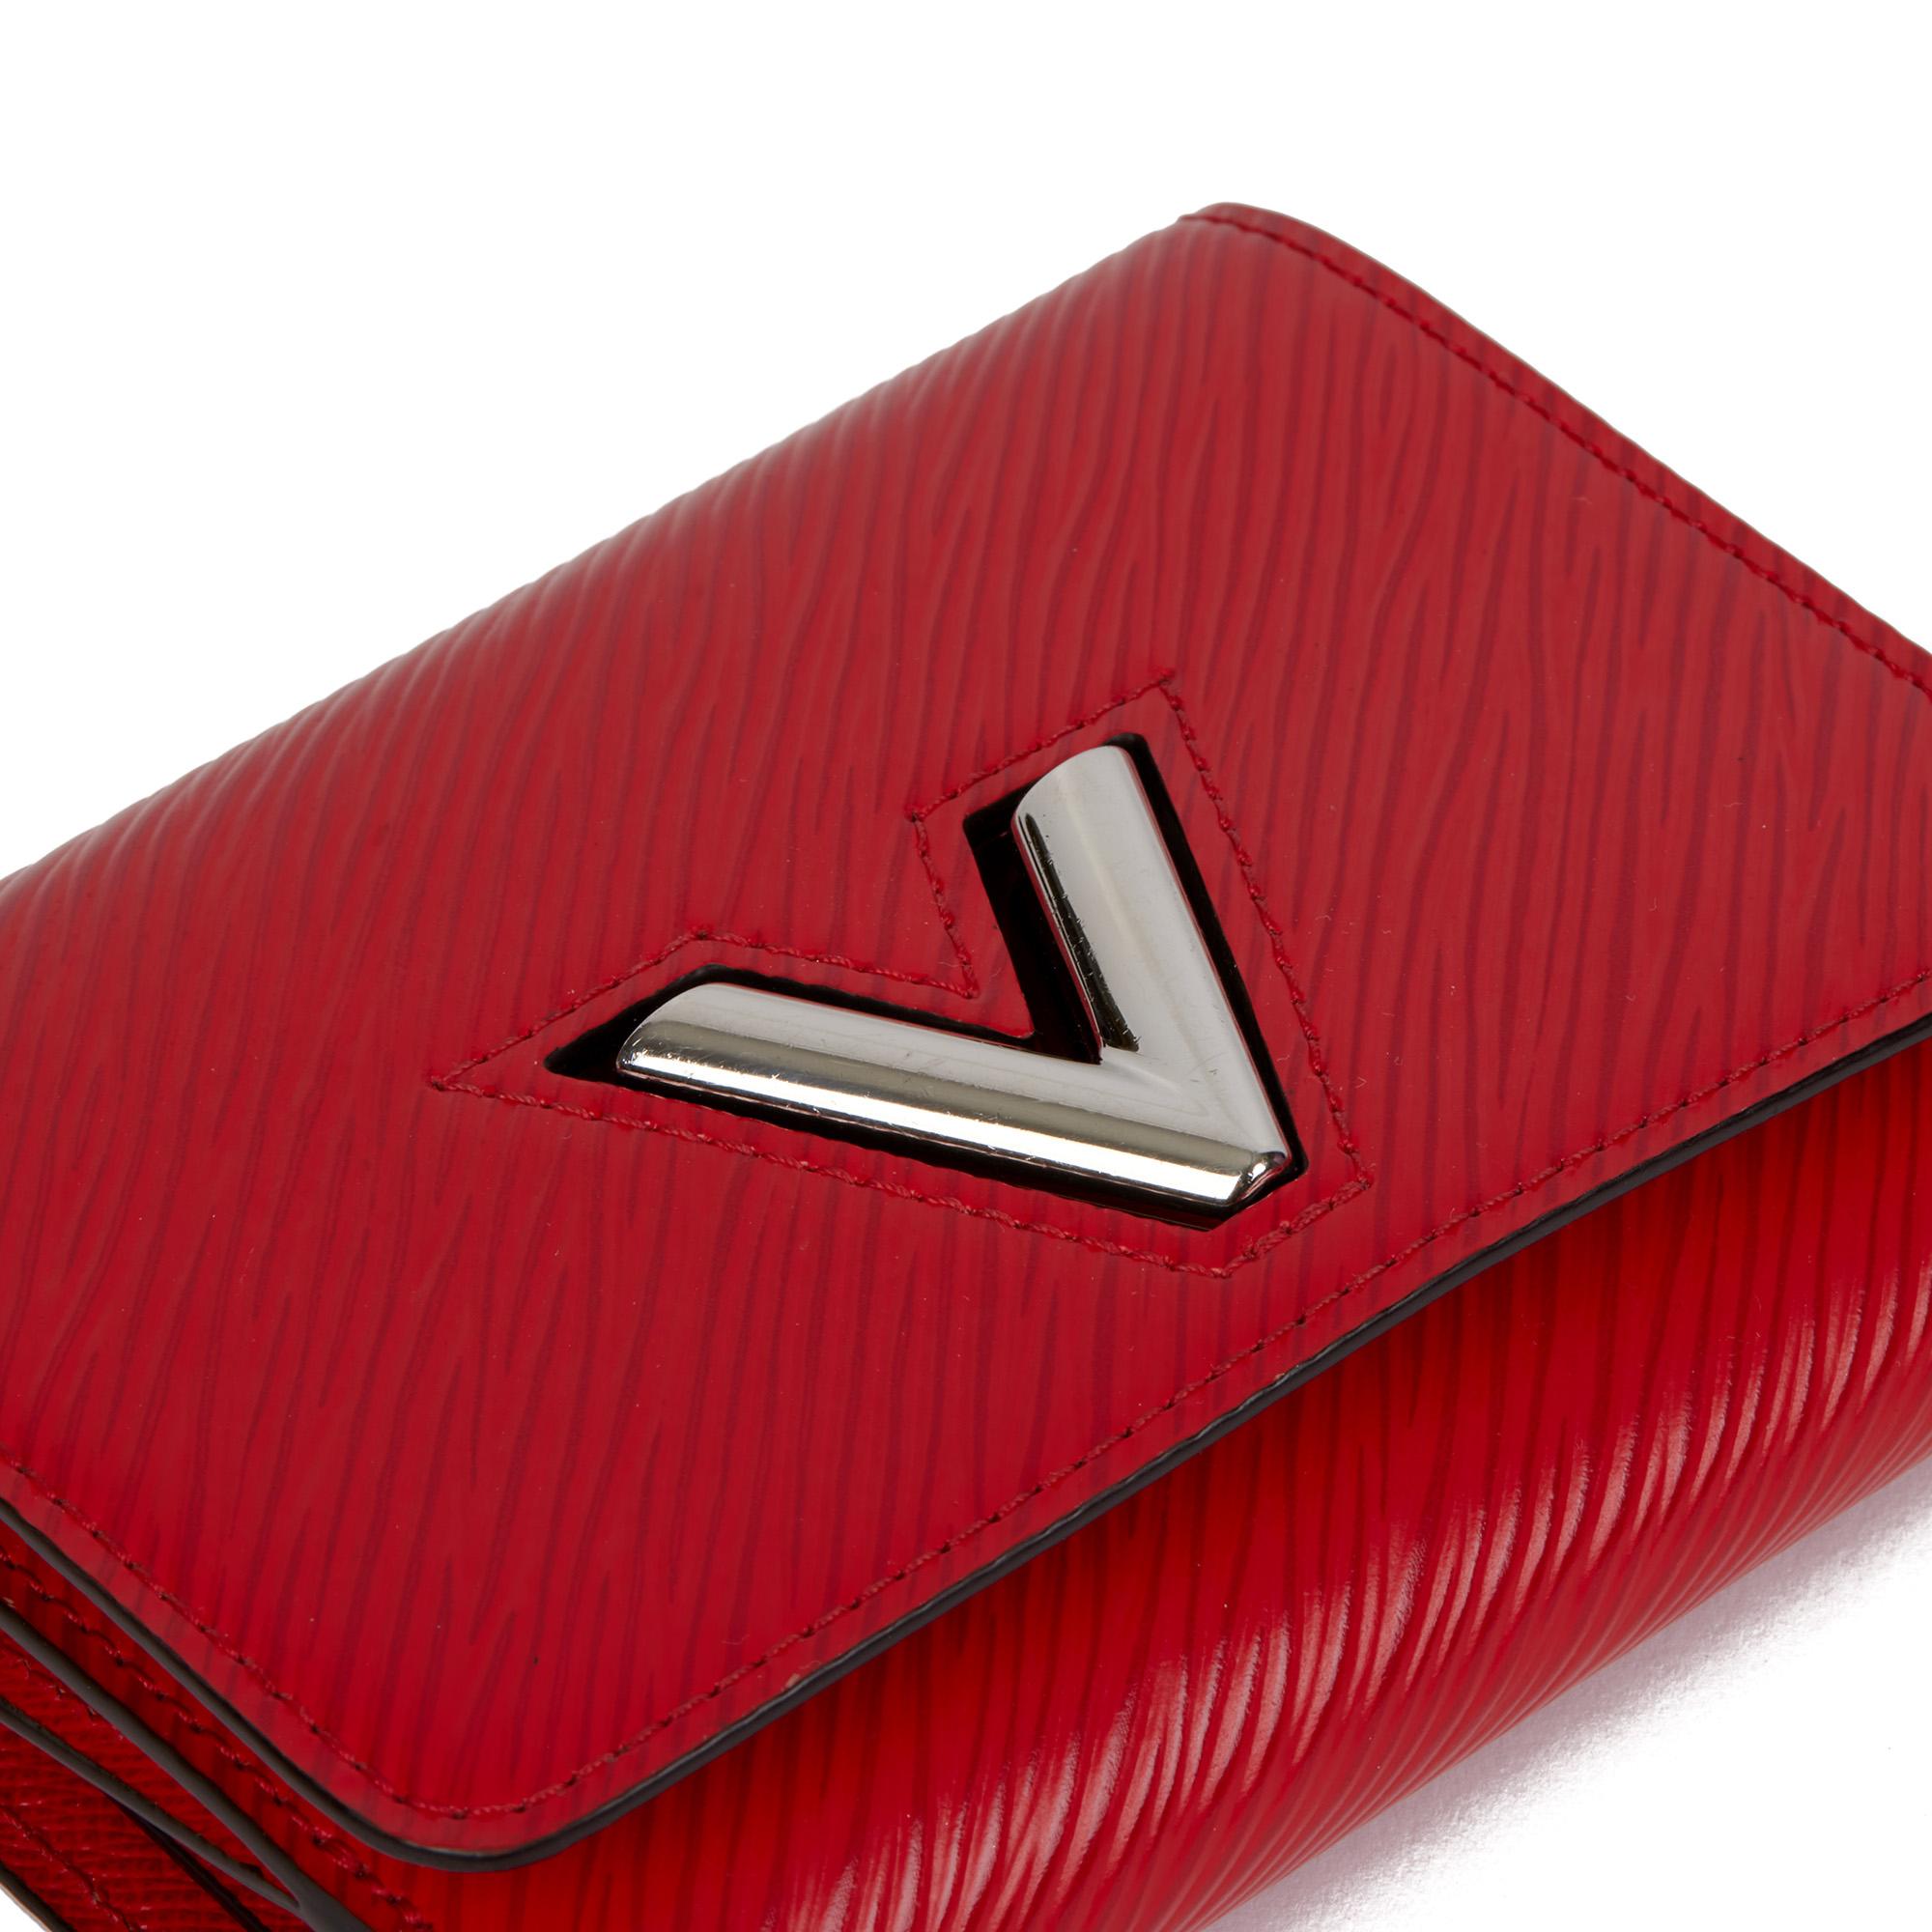 Louis Vuitton COQUELICOT EPI LEATHER TWIST COMPACT WALLET

CONDITION NOTES
The exterior is in excellent condition with minimal signs of use.
The interior is in excellent condition with minimal signs of use.
The hardware is in excellent condition